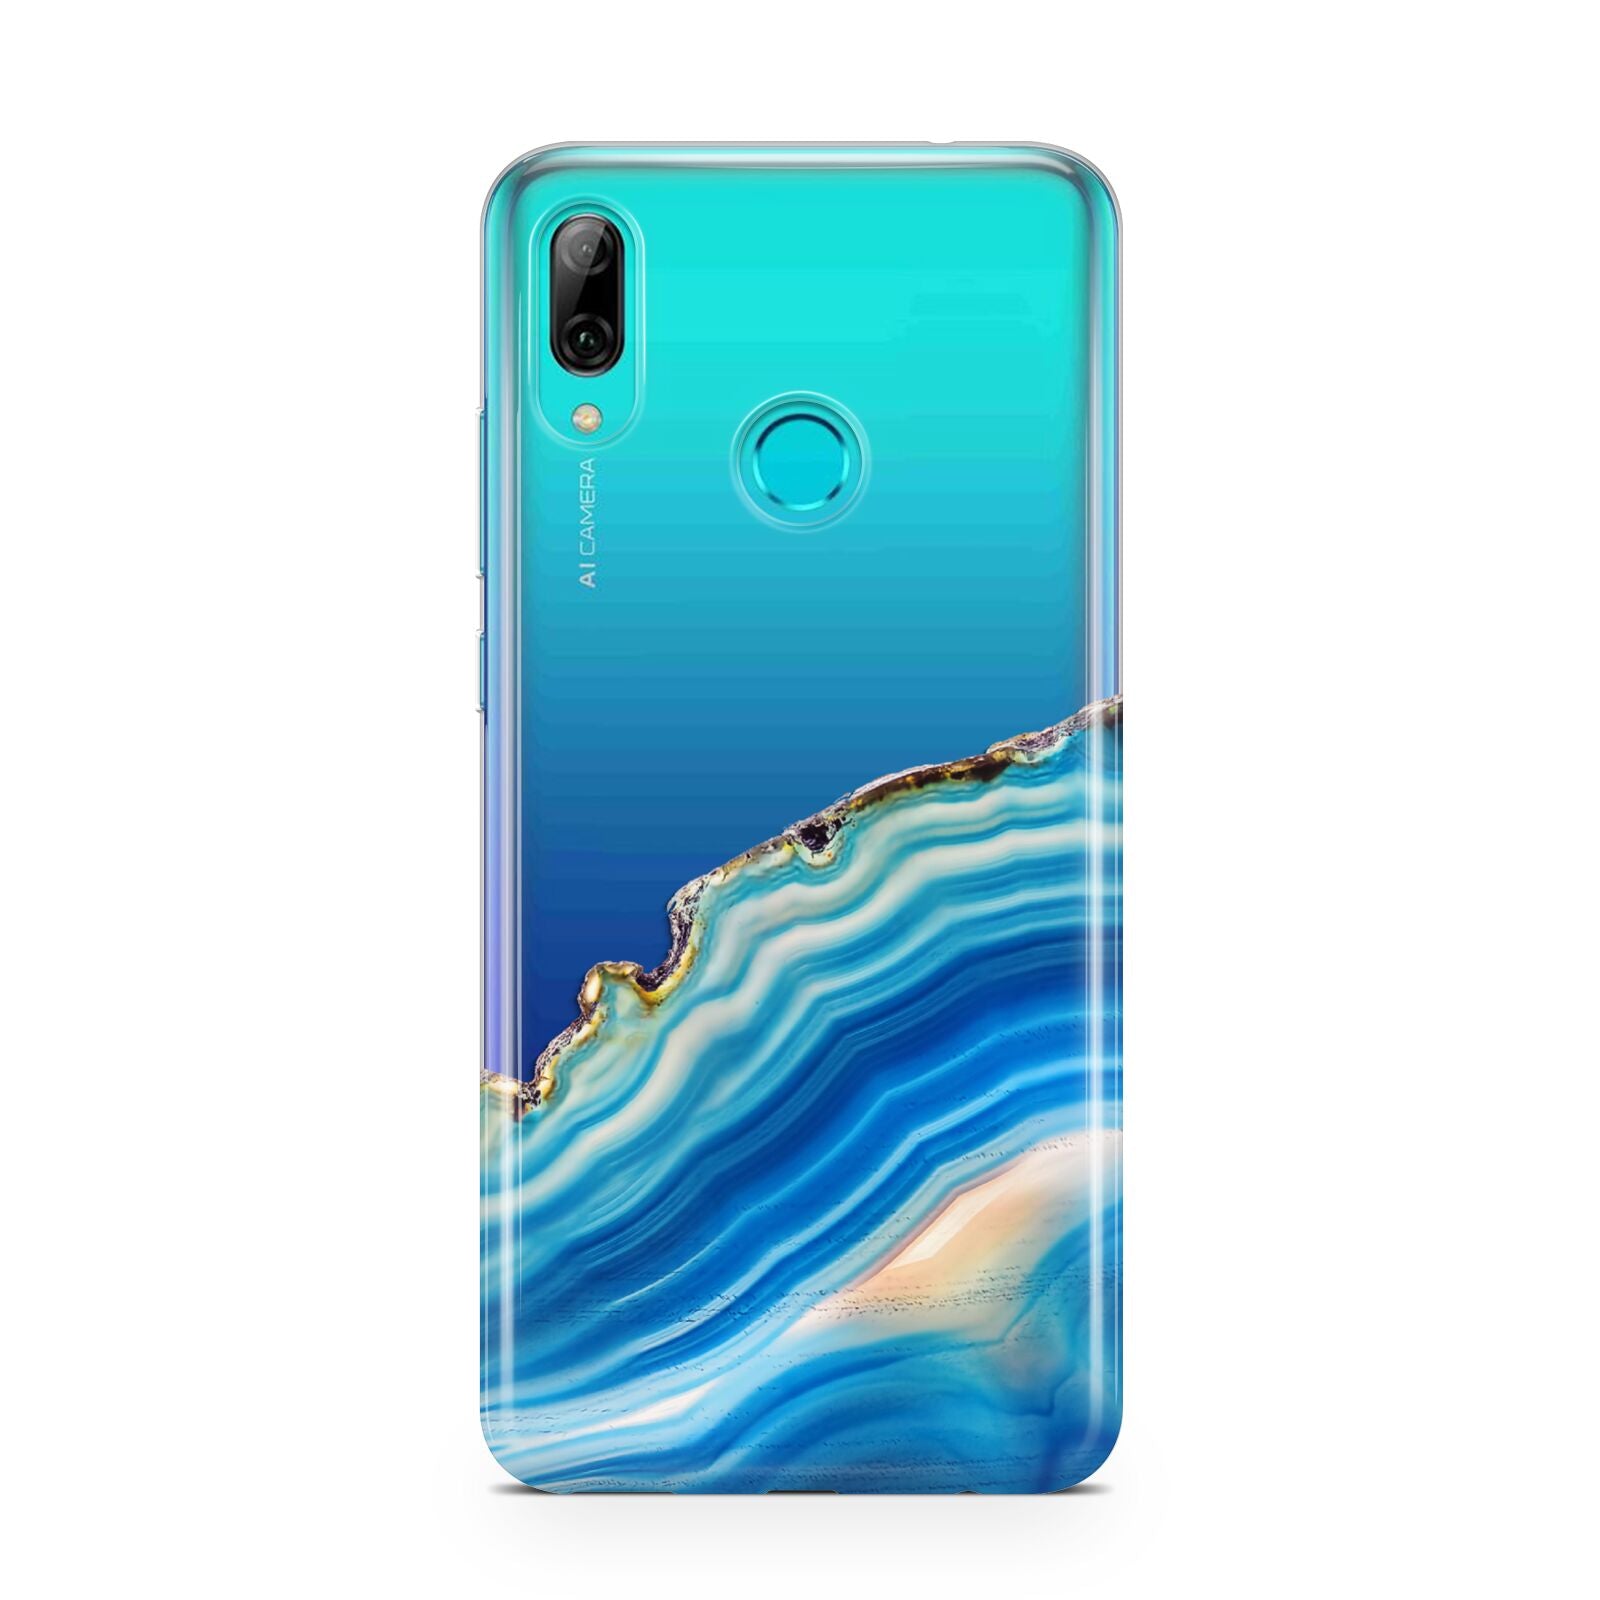 Agate Pale Blue and Bright Blue Huawei P Smart 2019 Case